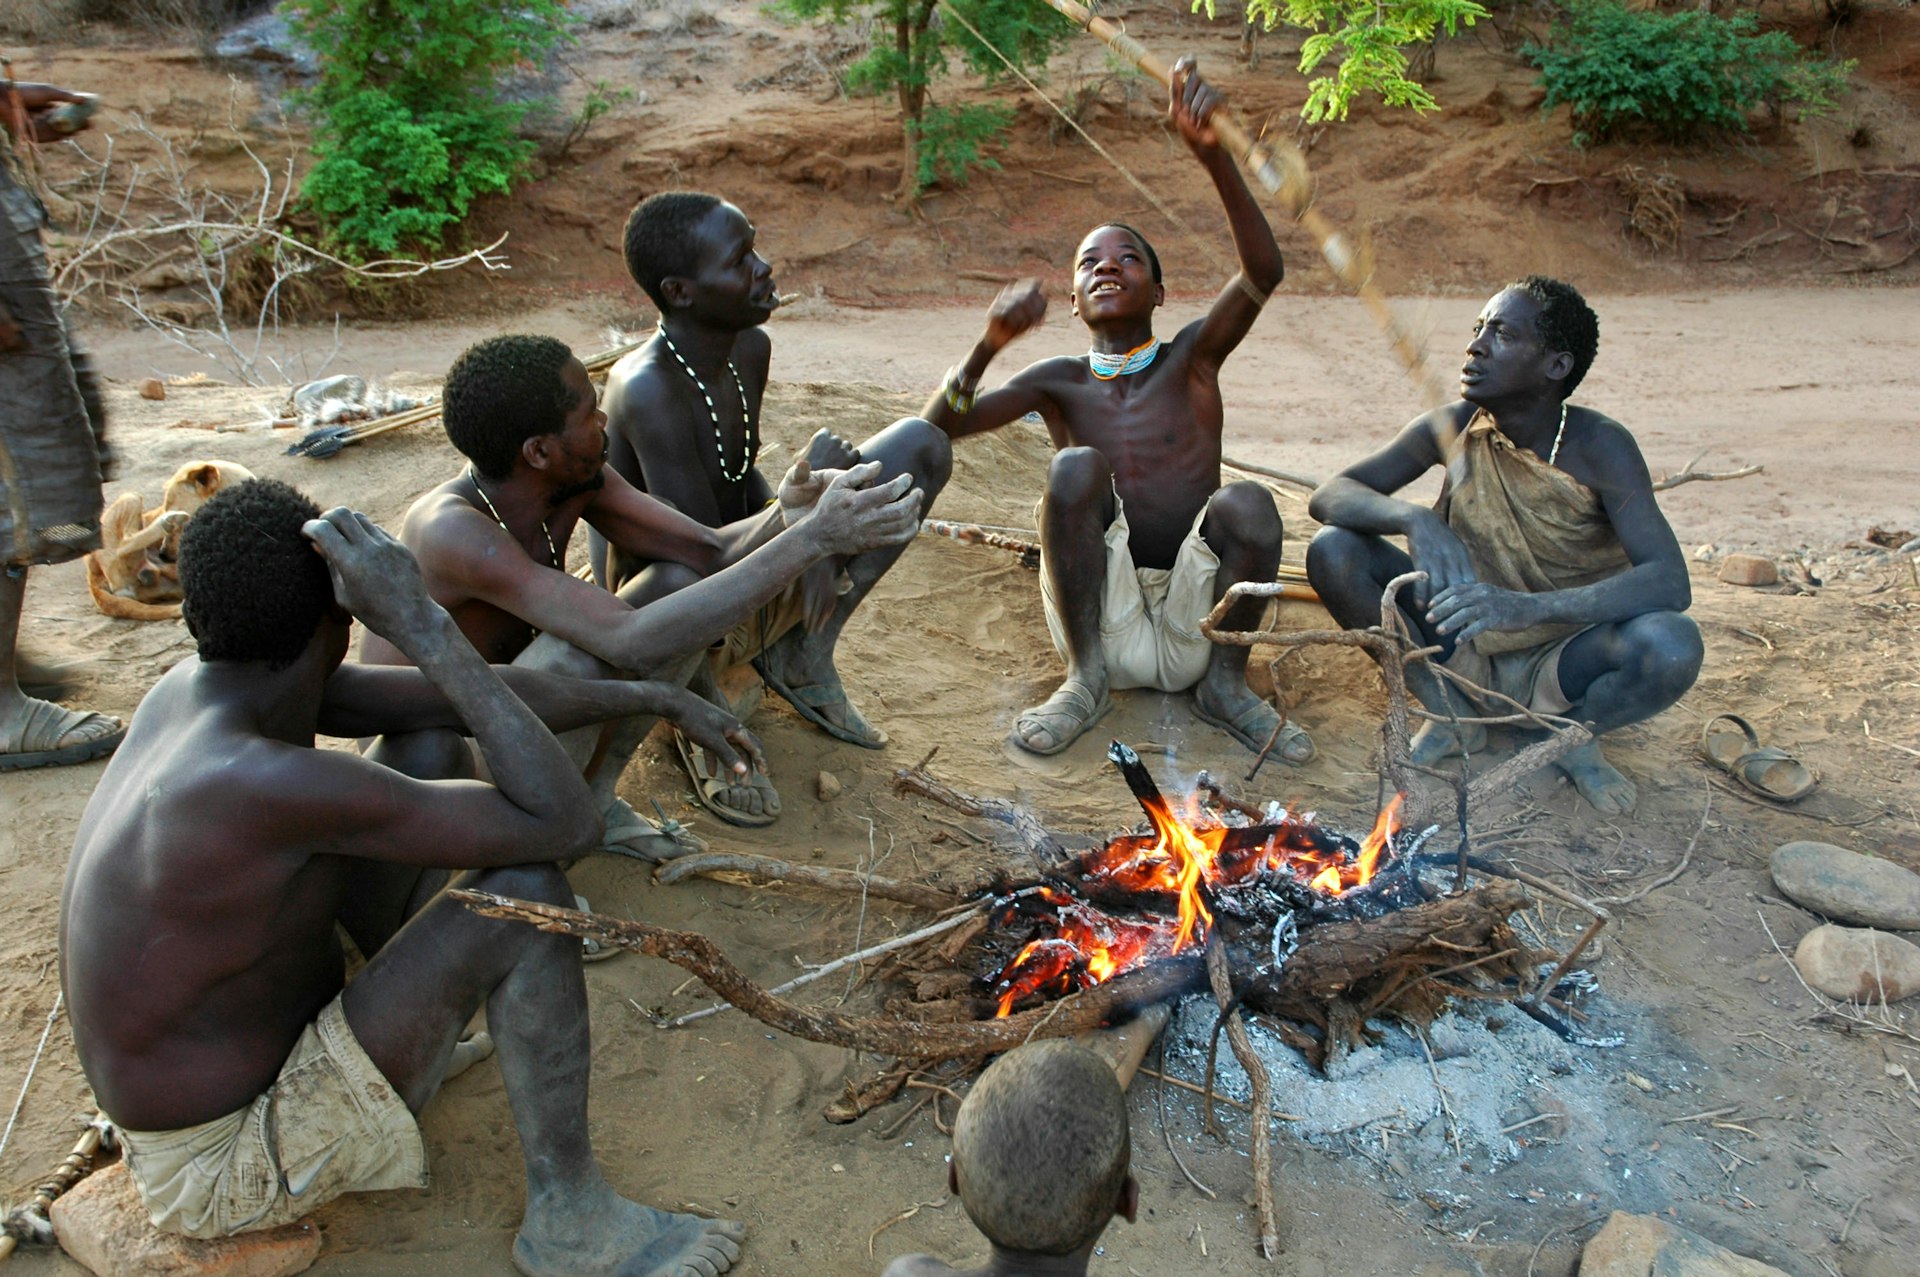 Group of Hadzabe tribesmen sit around fire with bow and arrow.